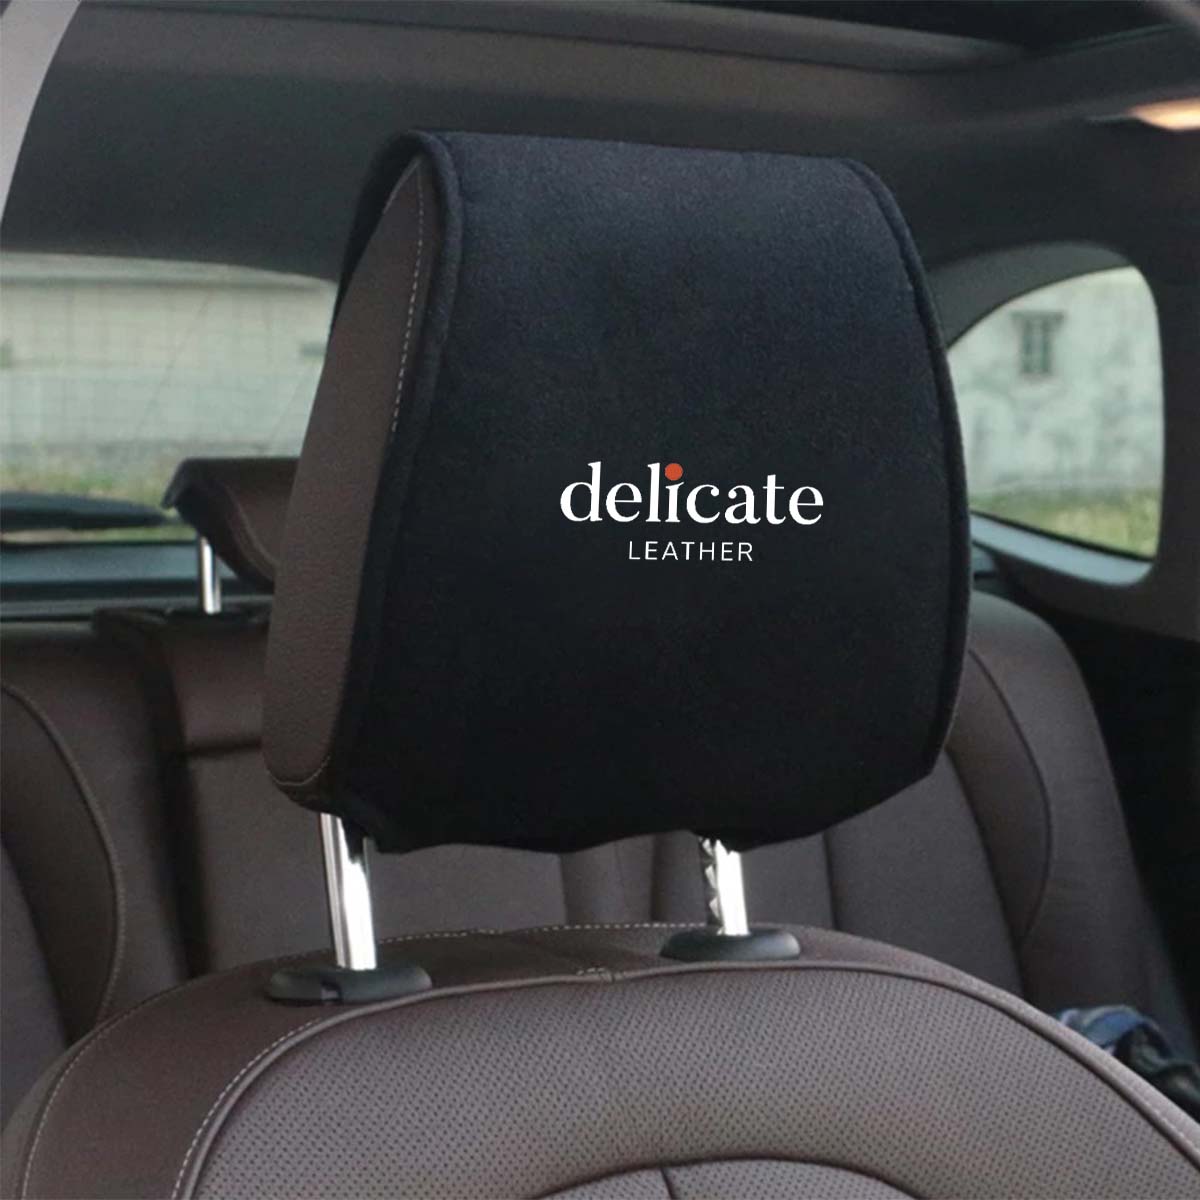 Jeep Car Seat Headrest Cover: Stylish Protection for Your Vehicle's Headrests